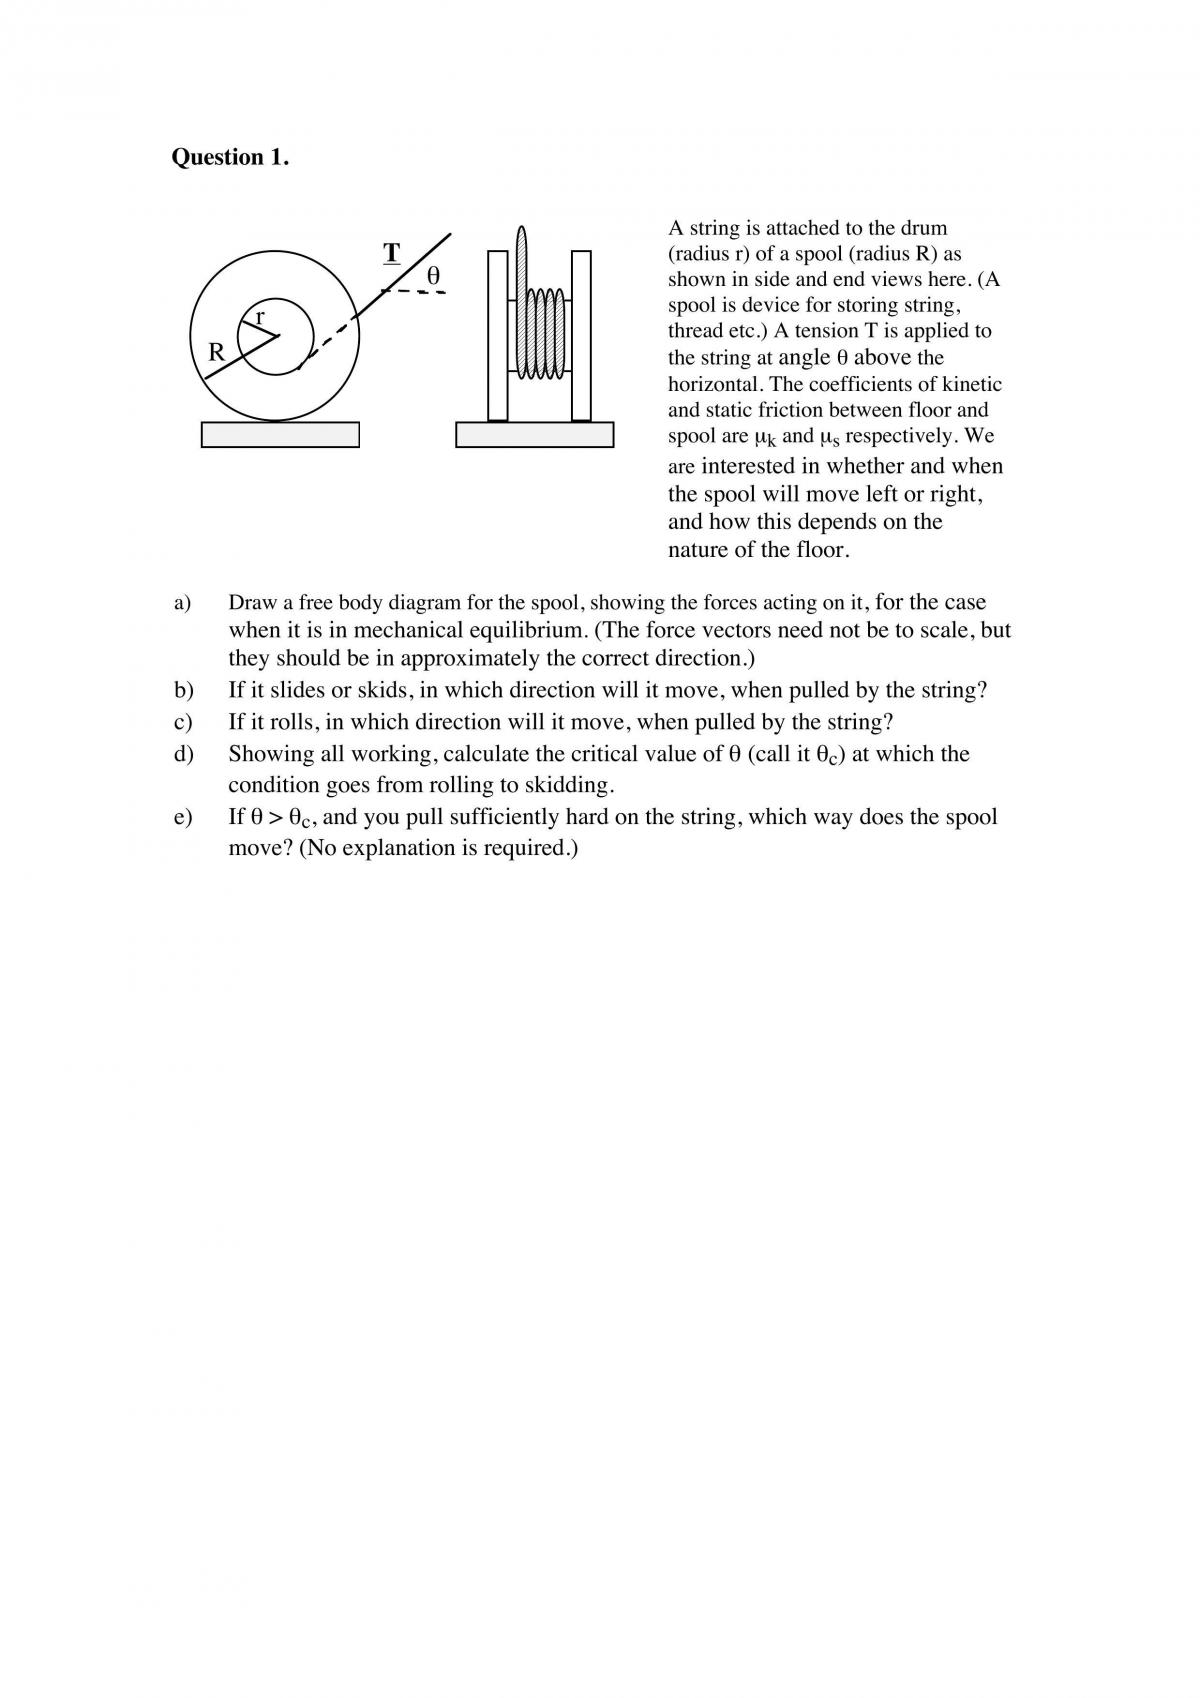 Phys1121/1131 2010 T1 Final Exam solution (Question 1 and 2) - Page 1